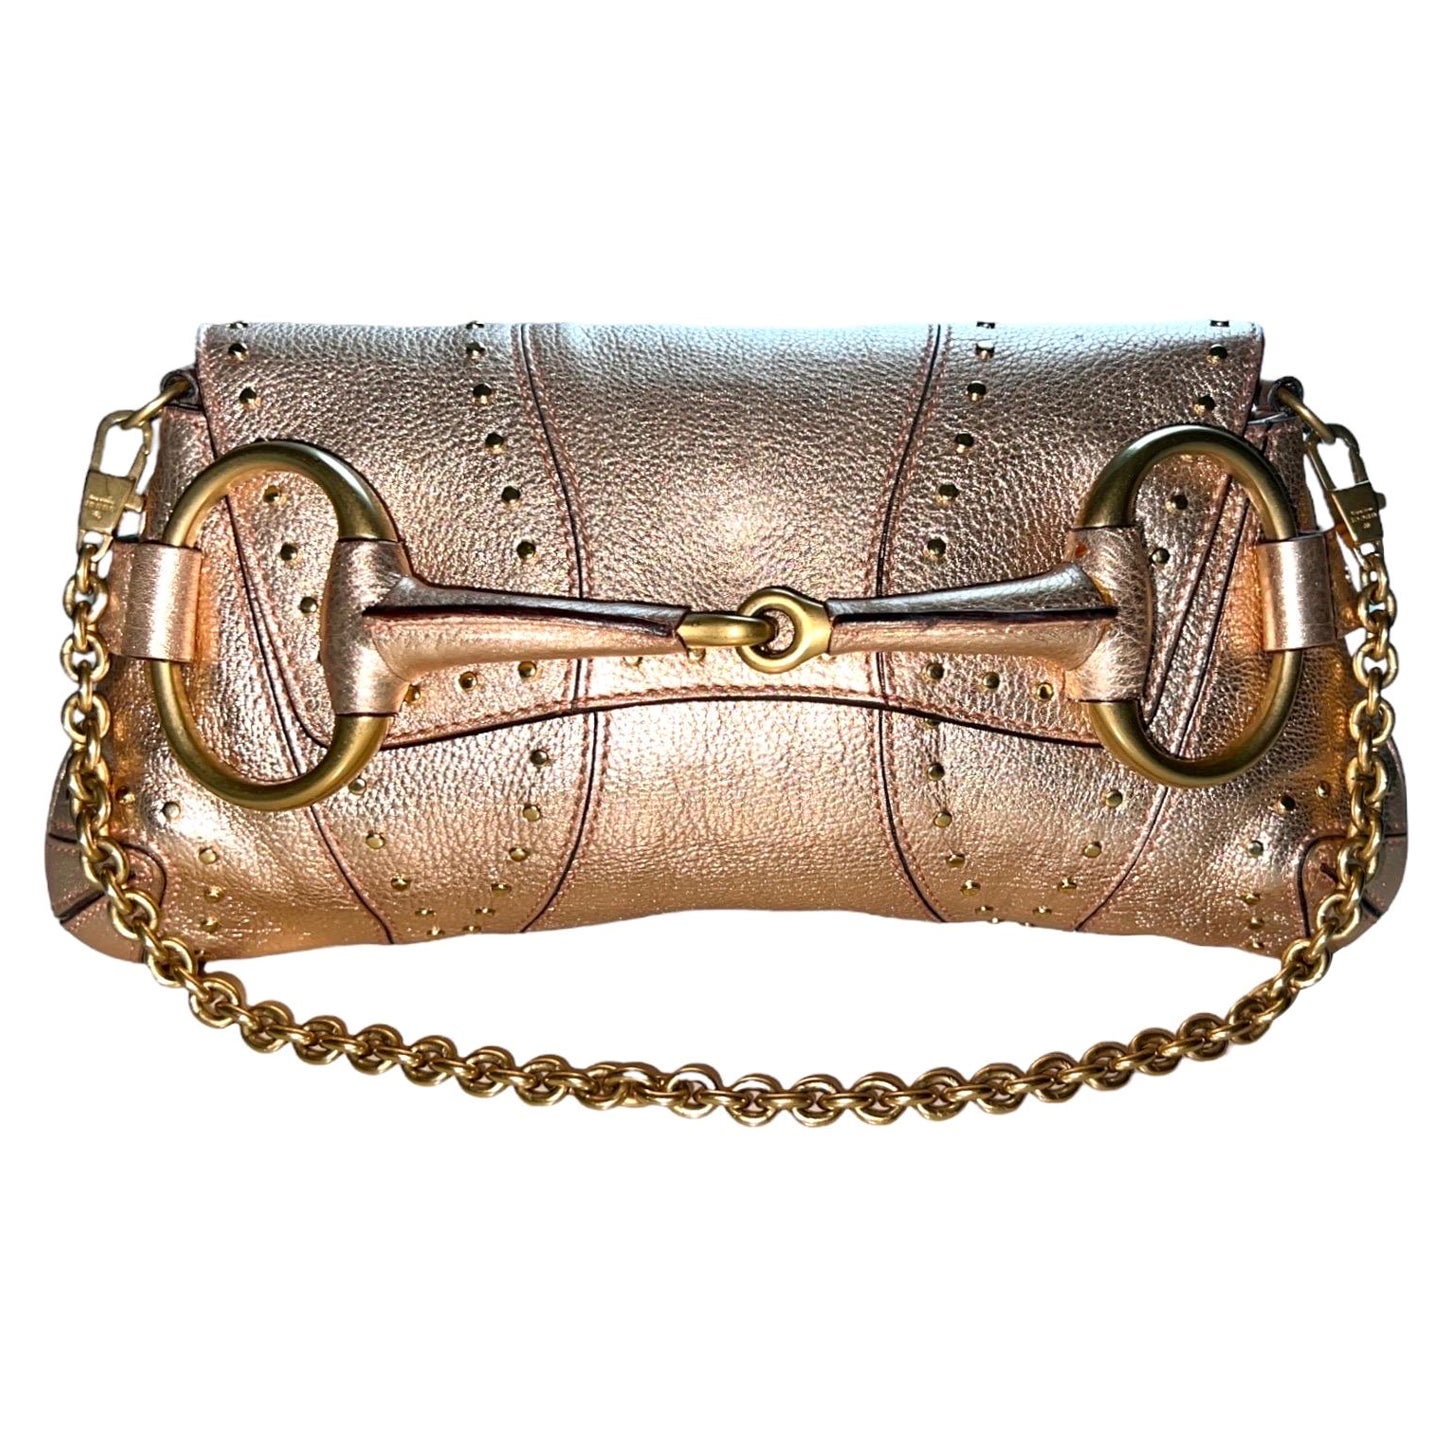 Gucci By Tom Ford FW 2003 Metallic Pink Barbiecore Studded Horsebit Clutch Bag